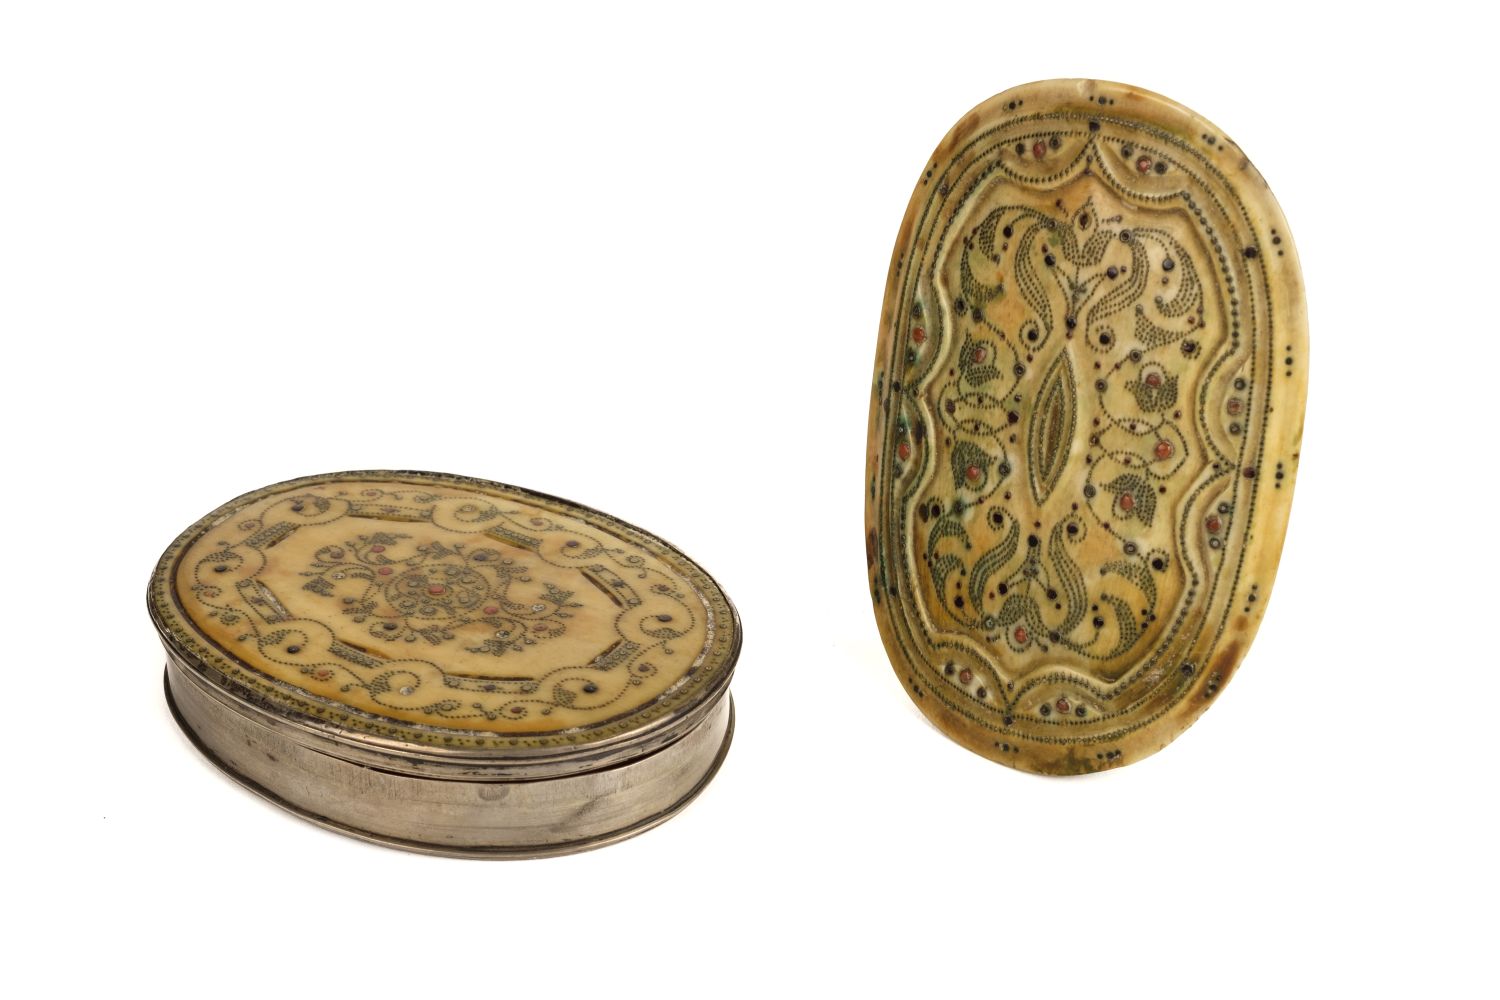 Lot 154 - Snuff box. A Late 17th century ivory pique